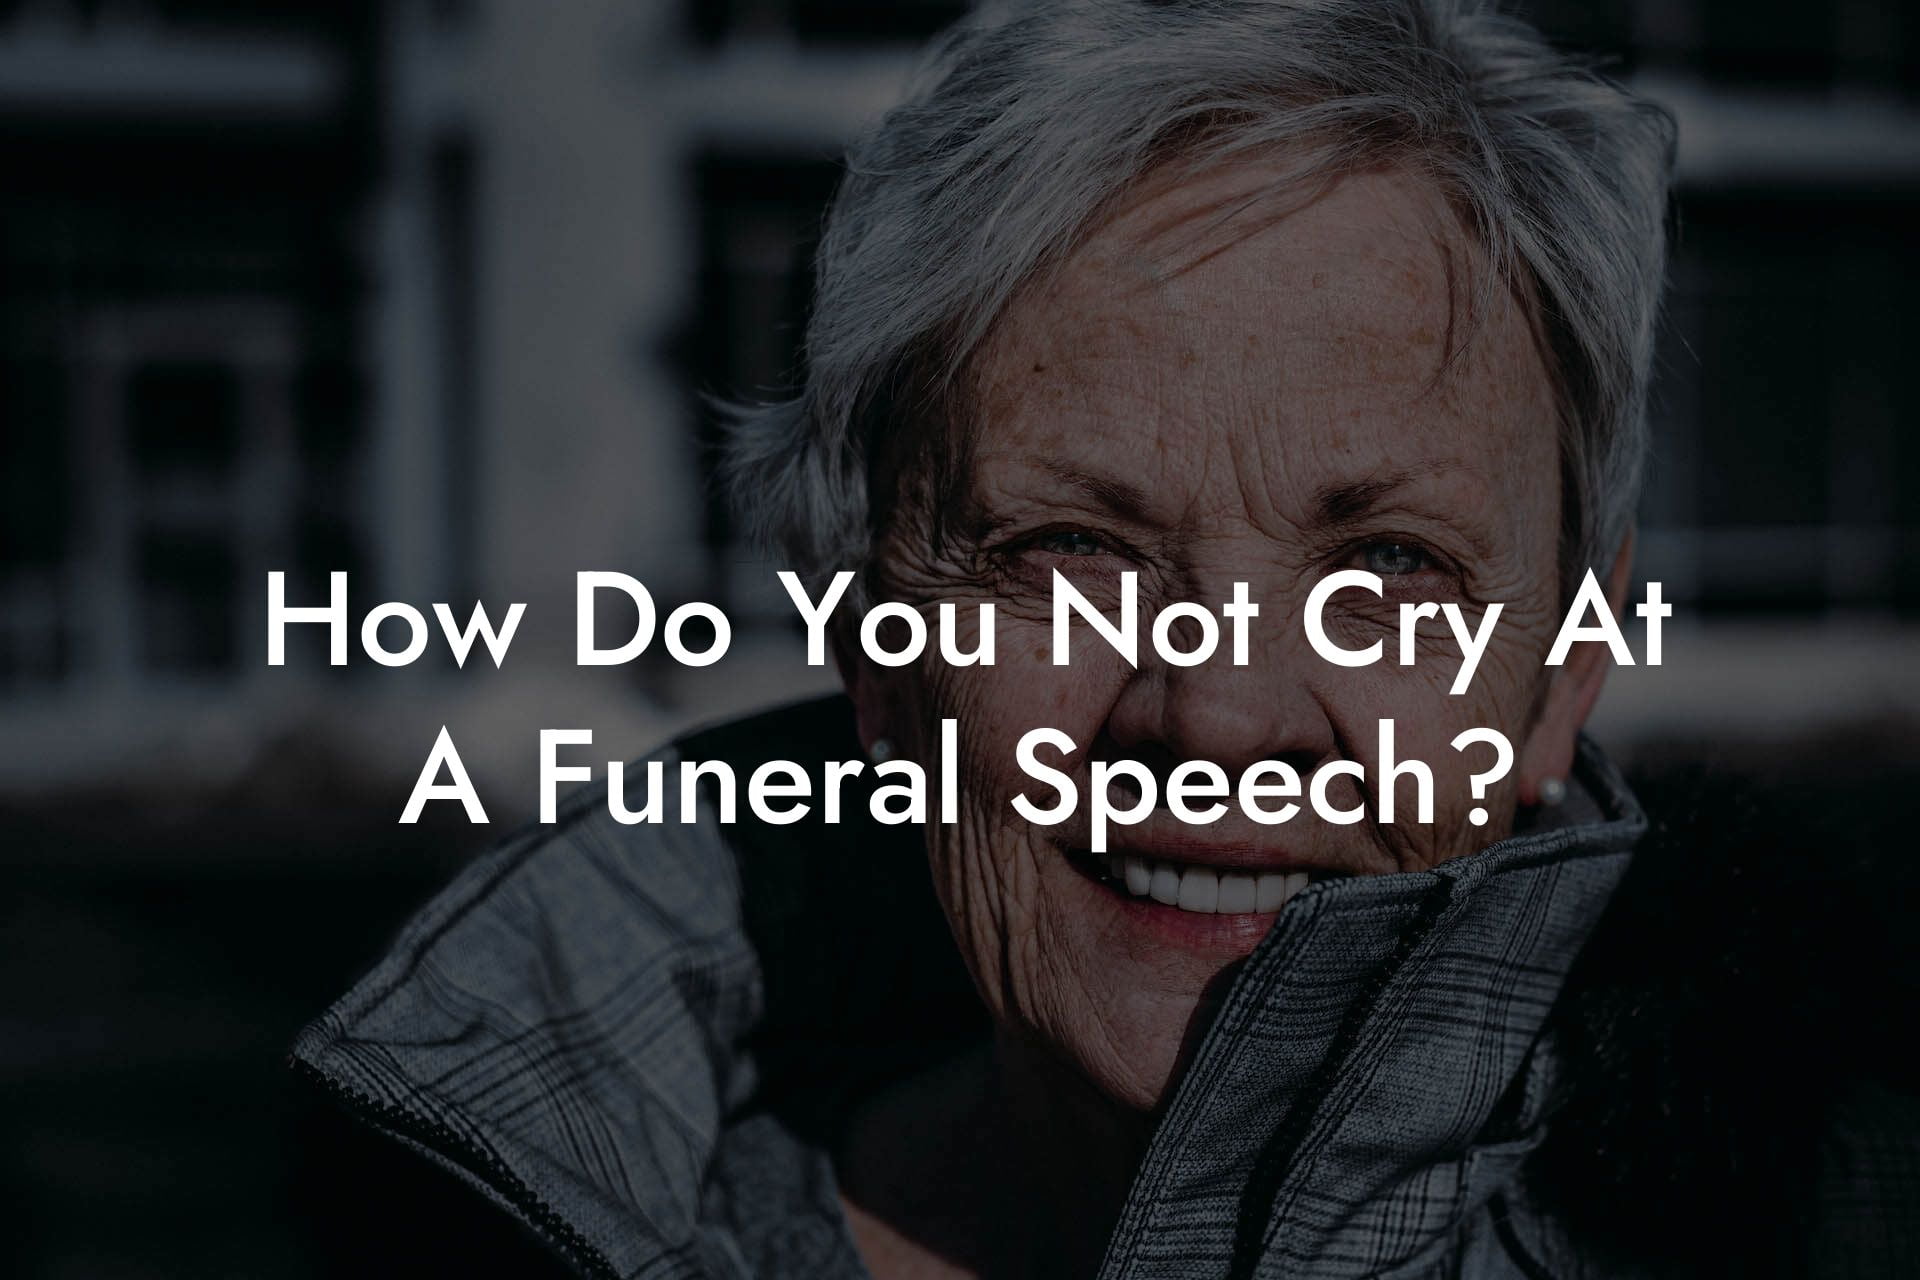 How Do You Not Cry At A Funeral Speech?